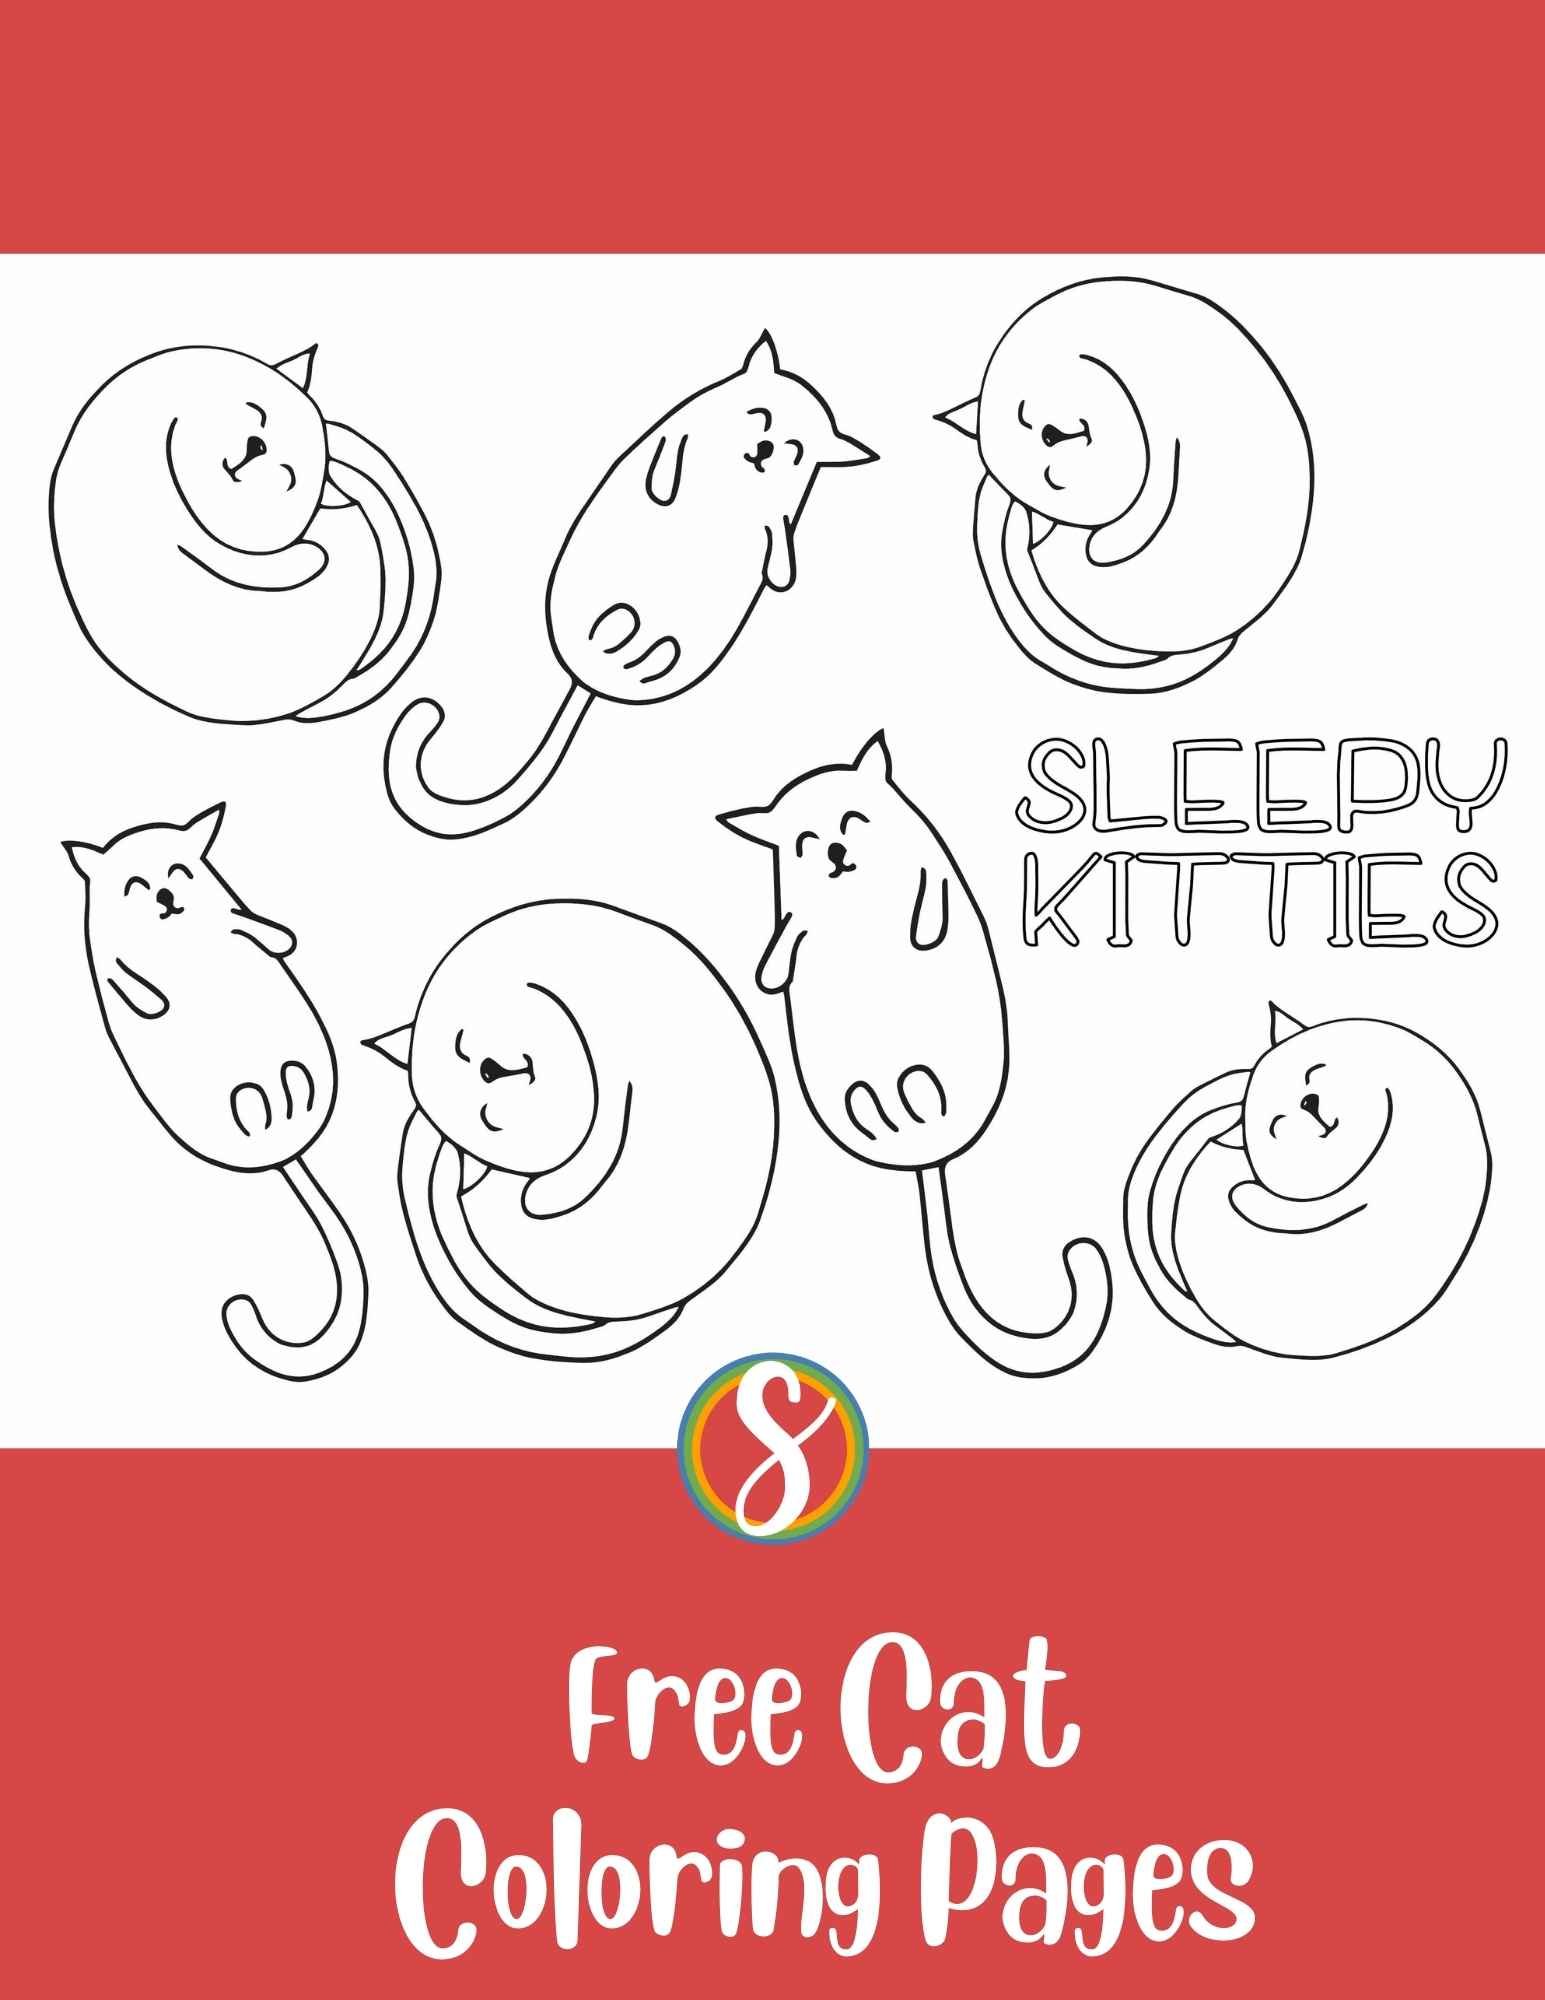 7 sleeping kitties on a cat coloring page